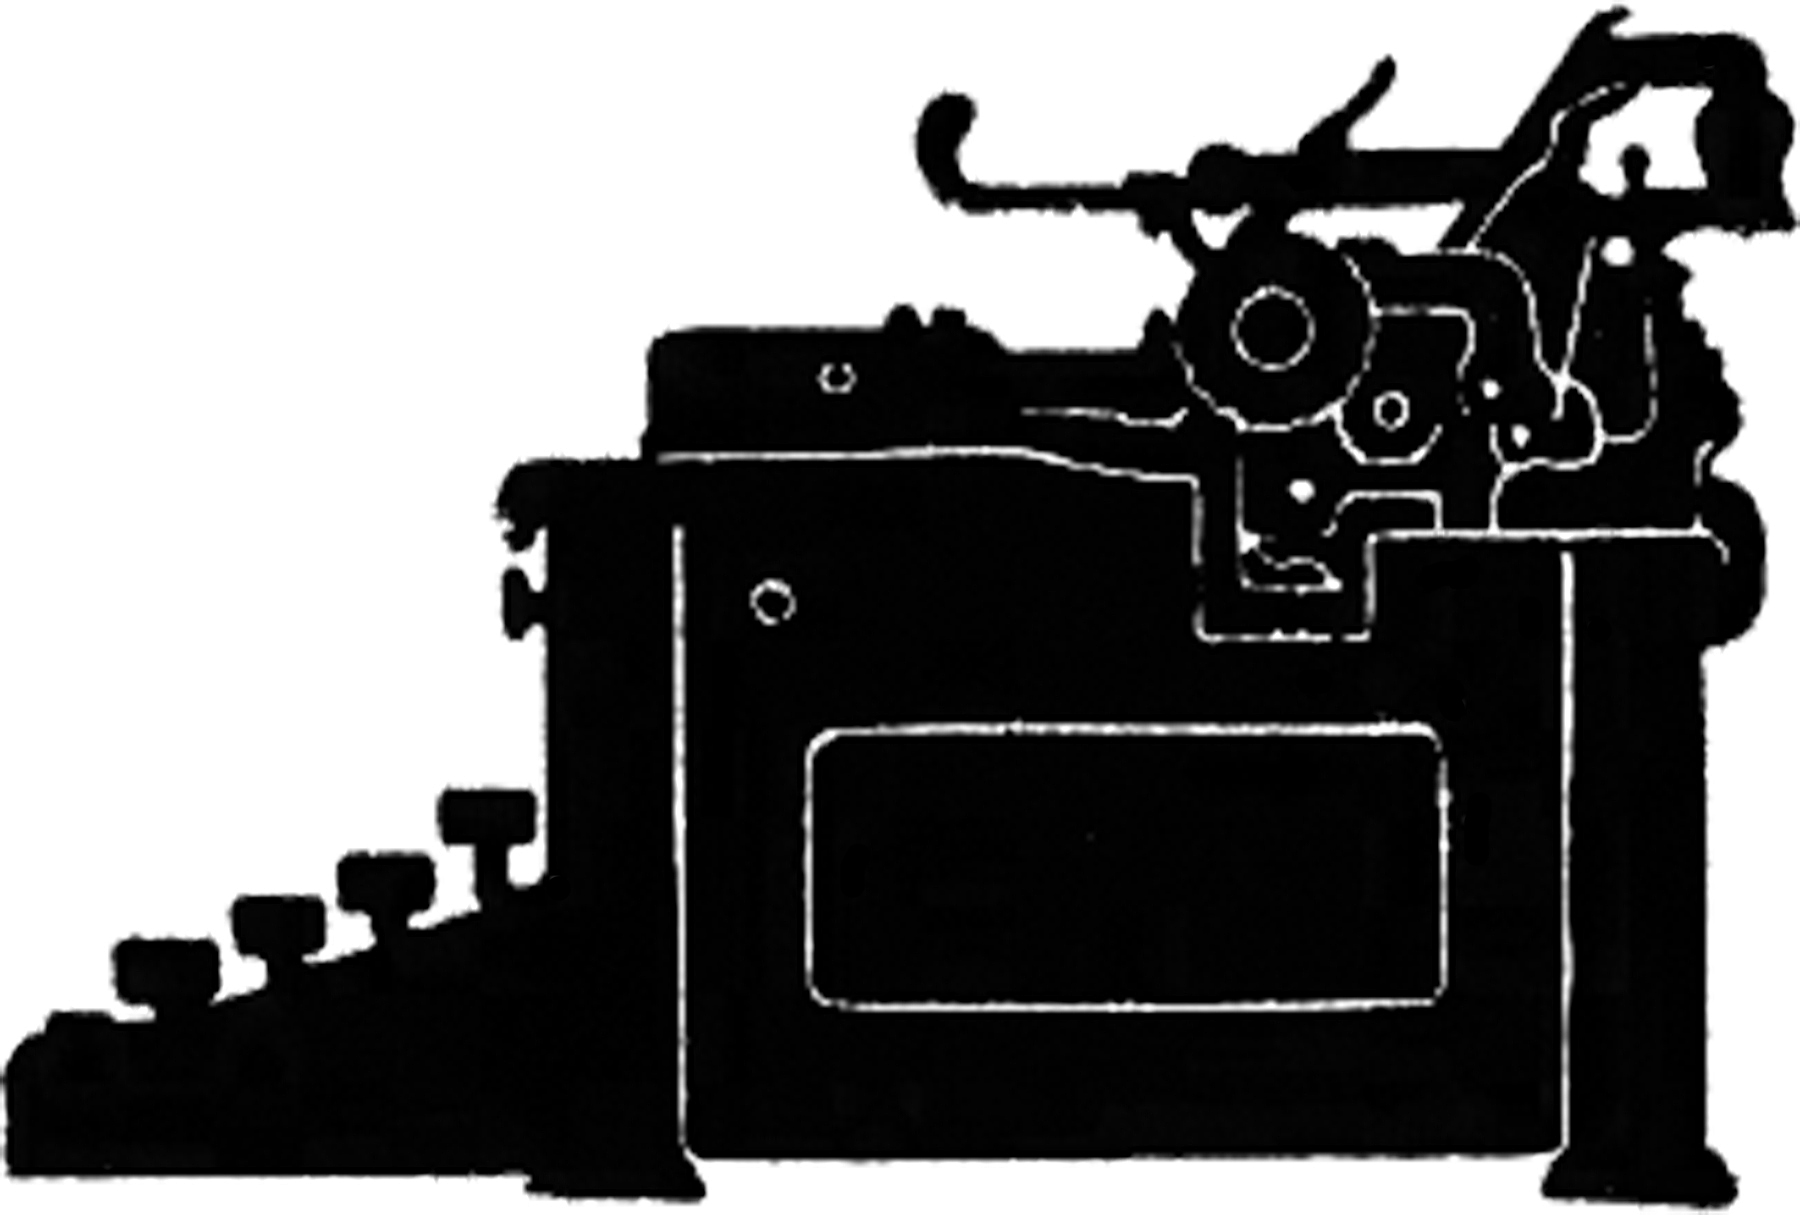 Vintage Typewriter Silhouette Image! - The Graphics Fairy